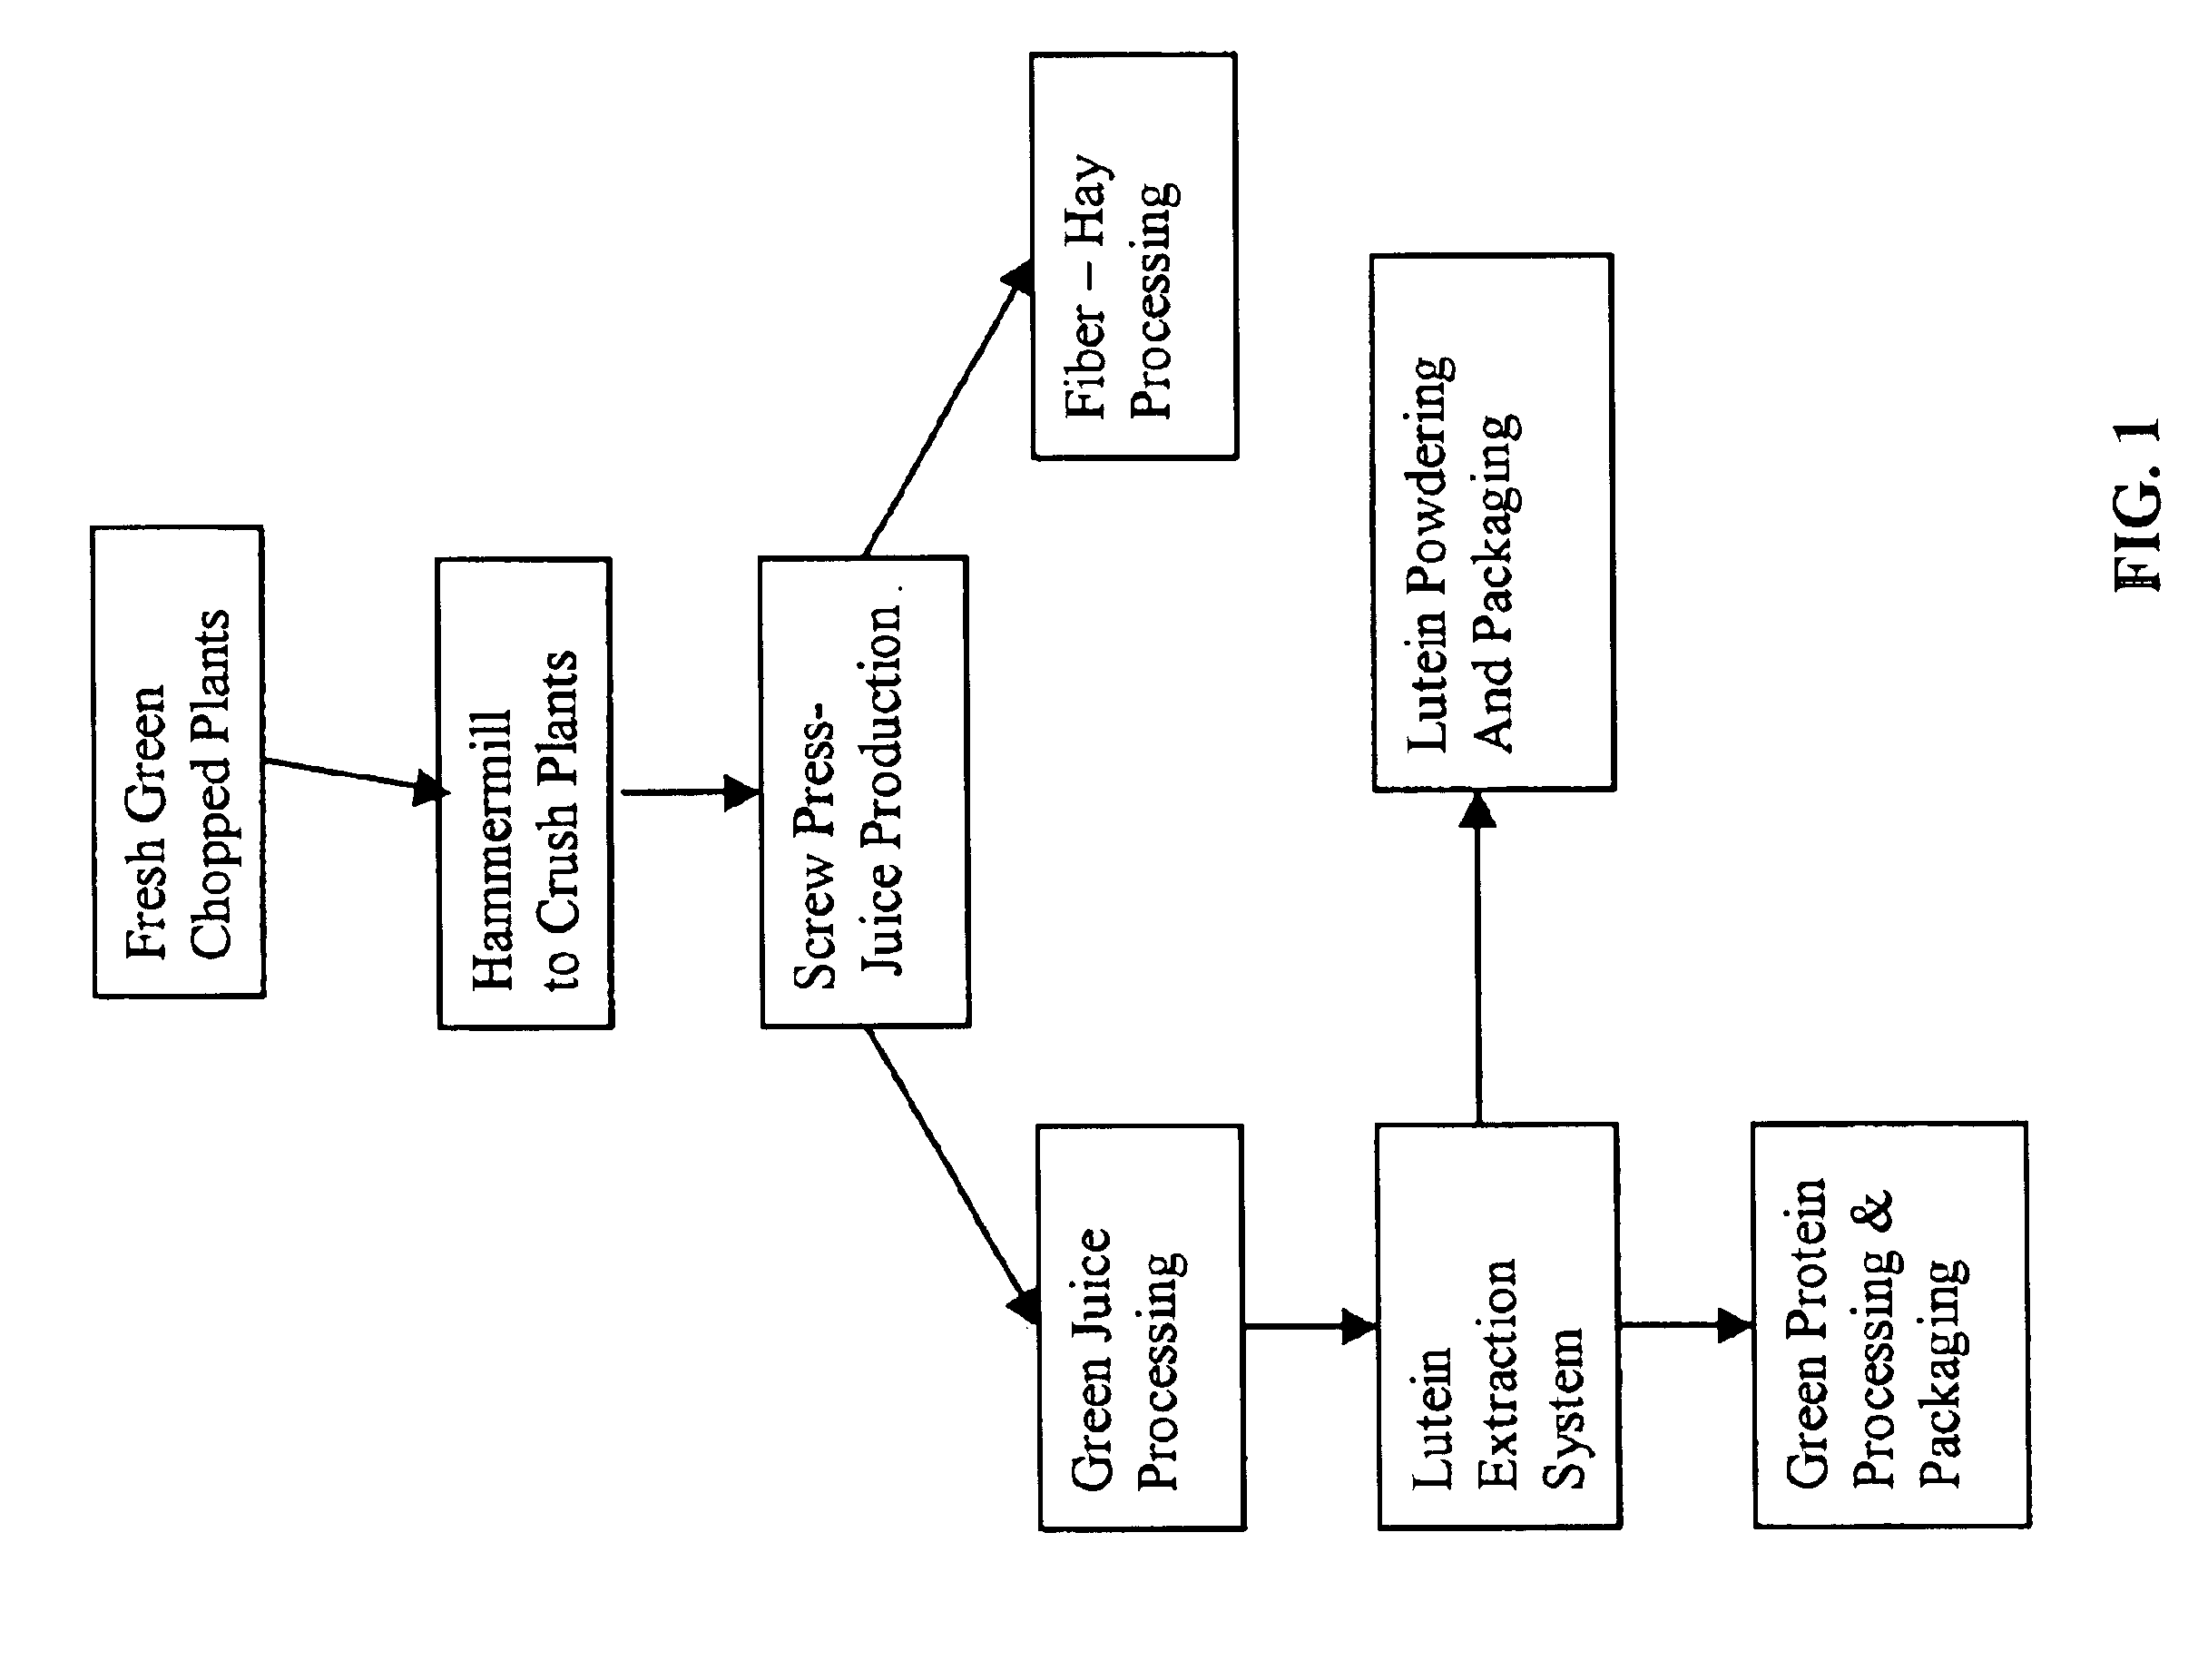 Method of extracting lutein from green plant materials